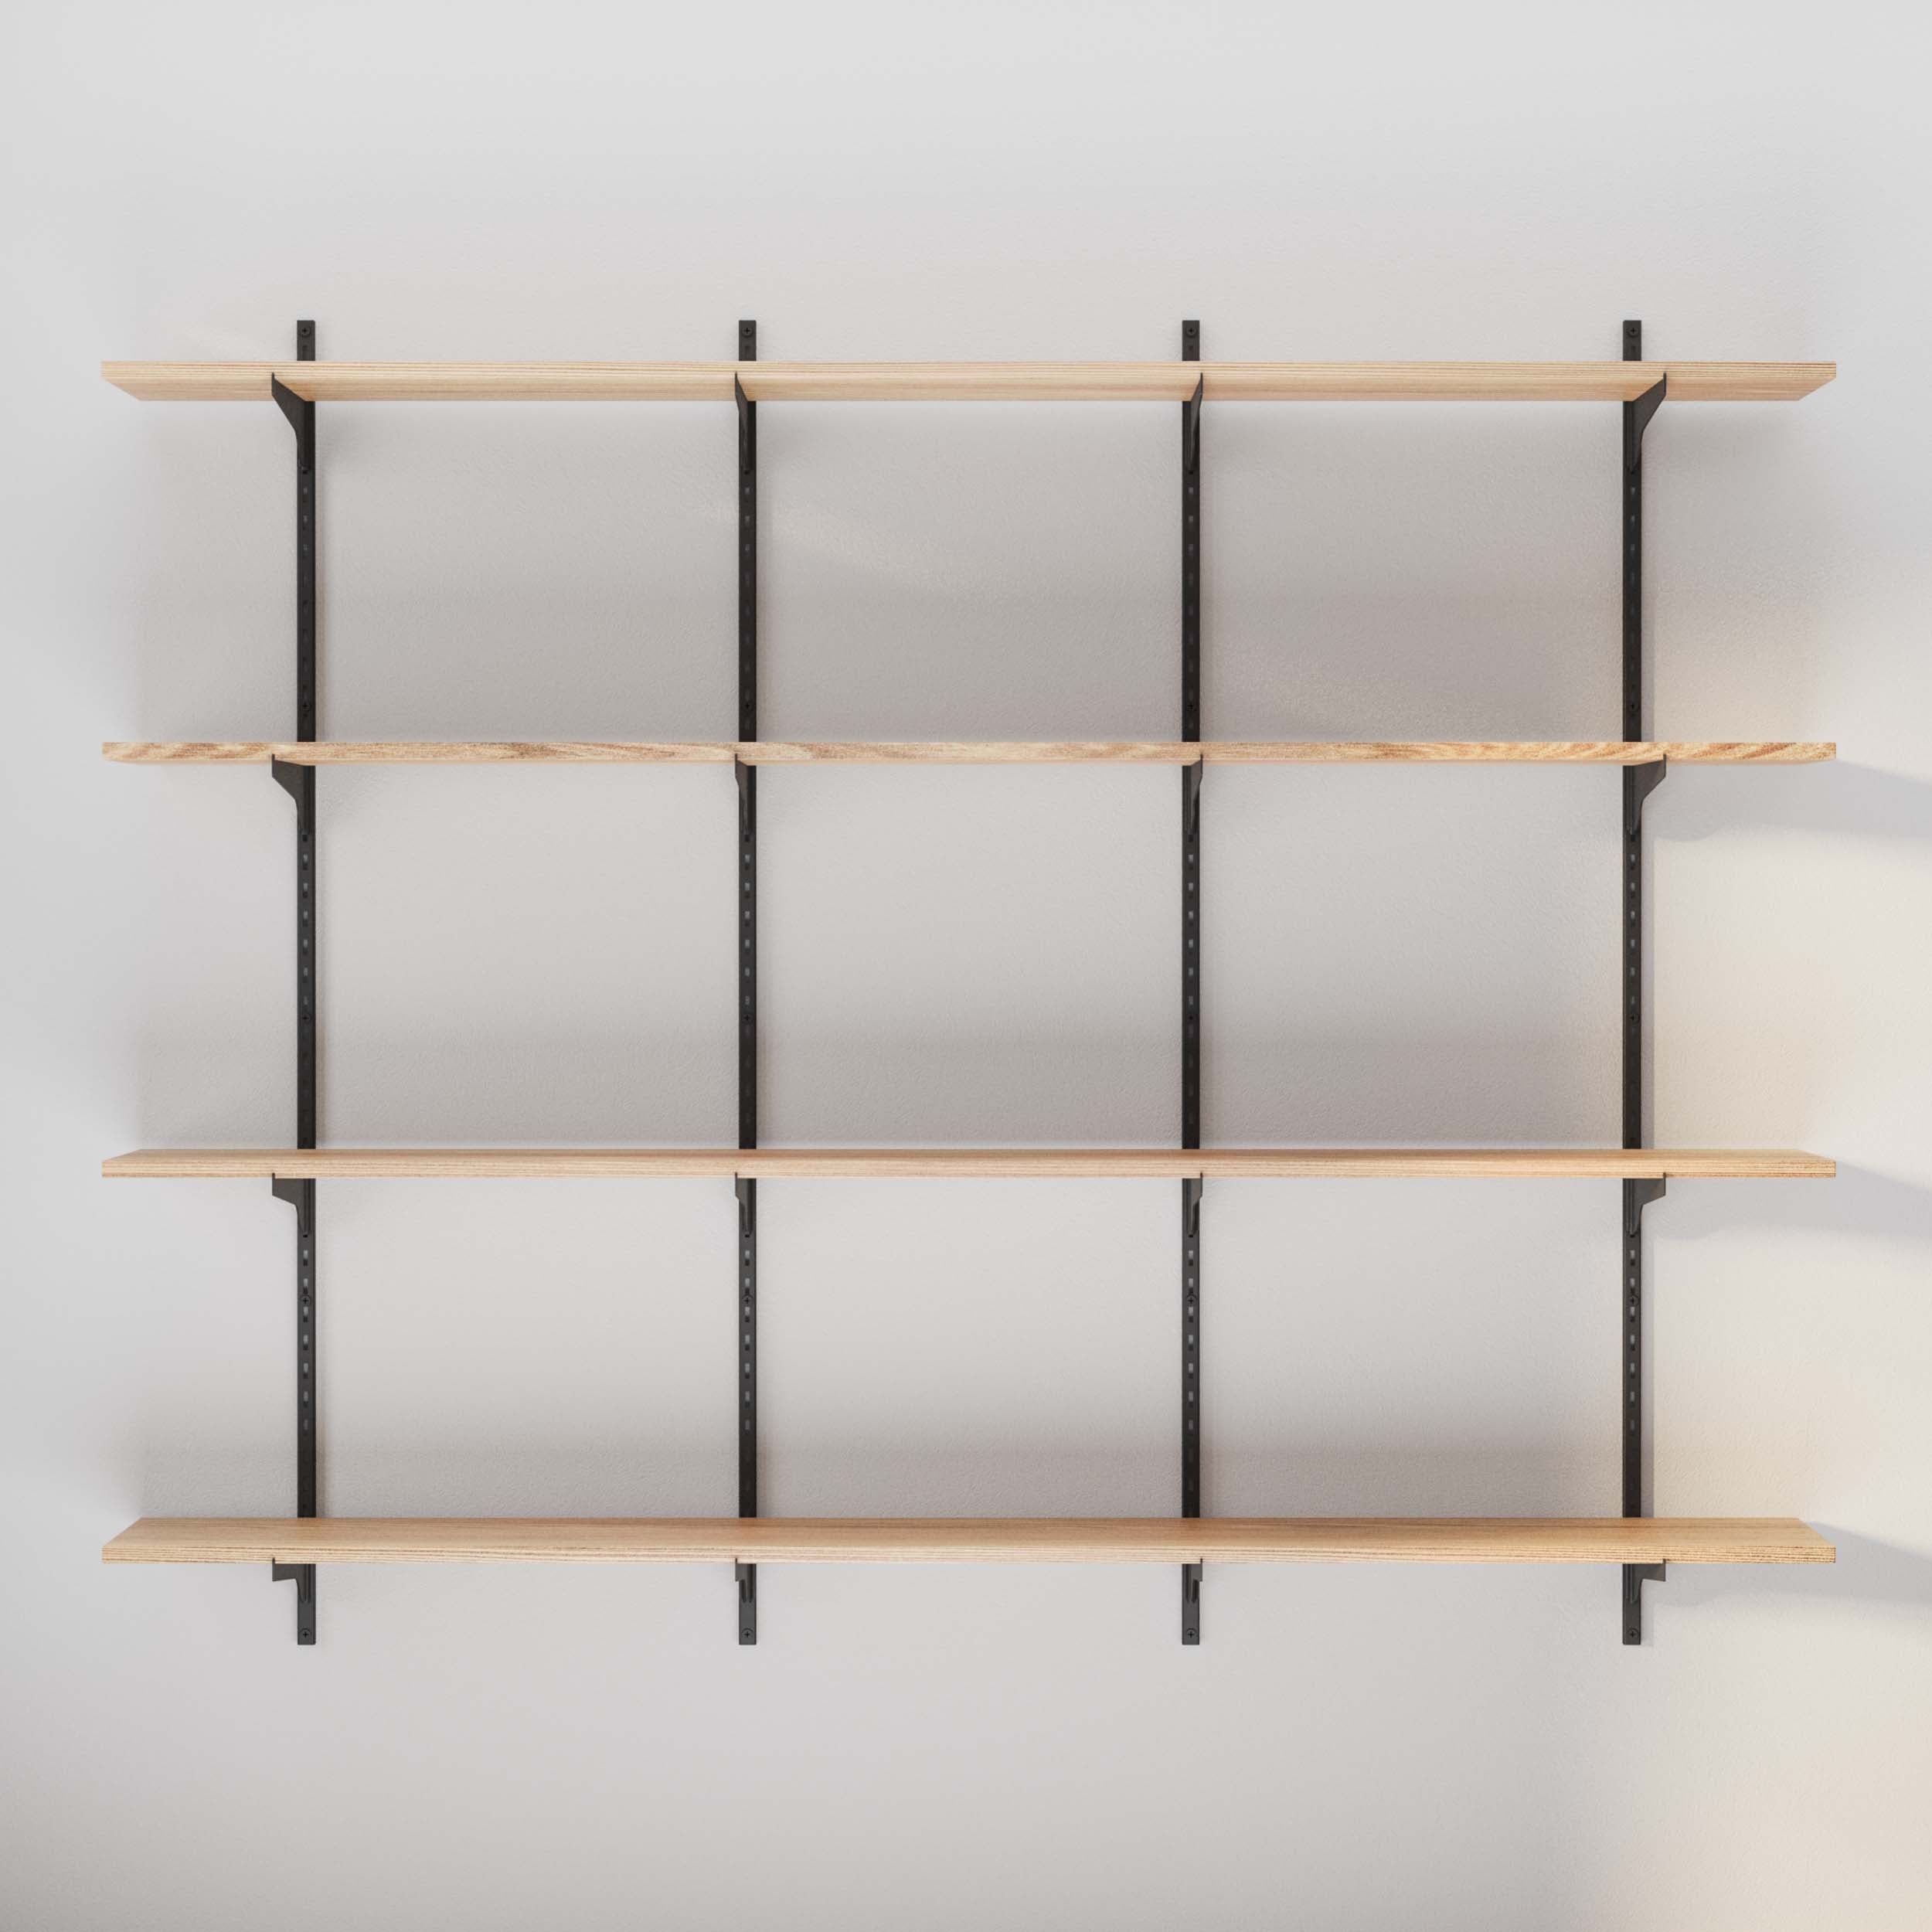 An empty 3 tier shelf setup, showcasing a minimalist and adaptable design suitable for any modern space, awaiting personalization.